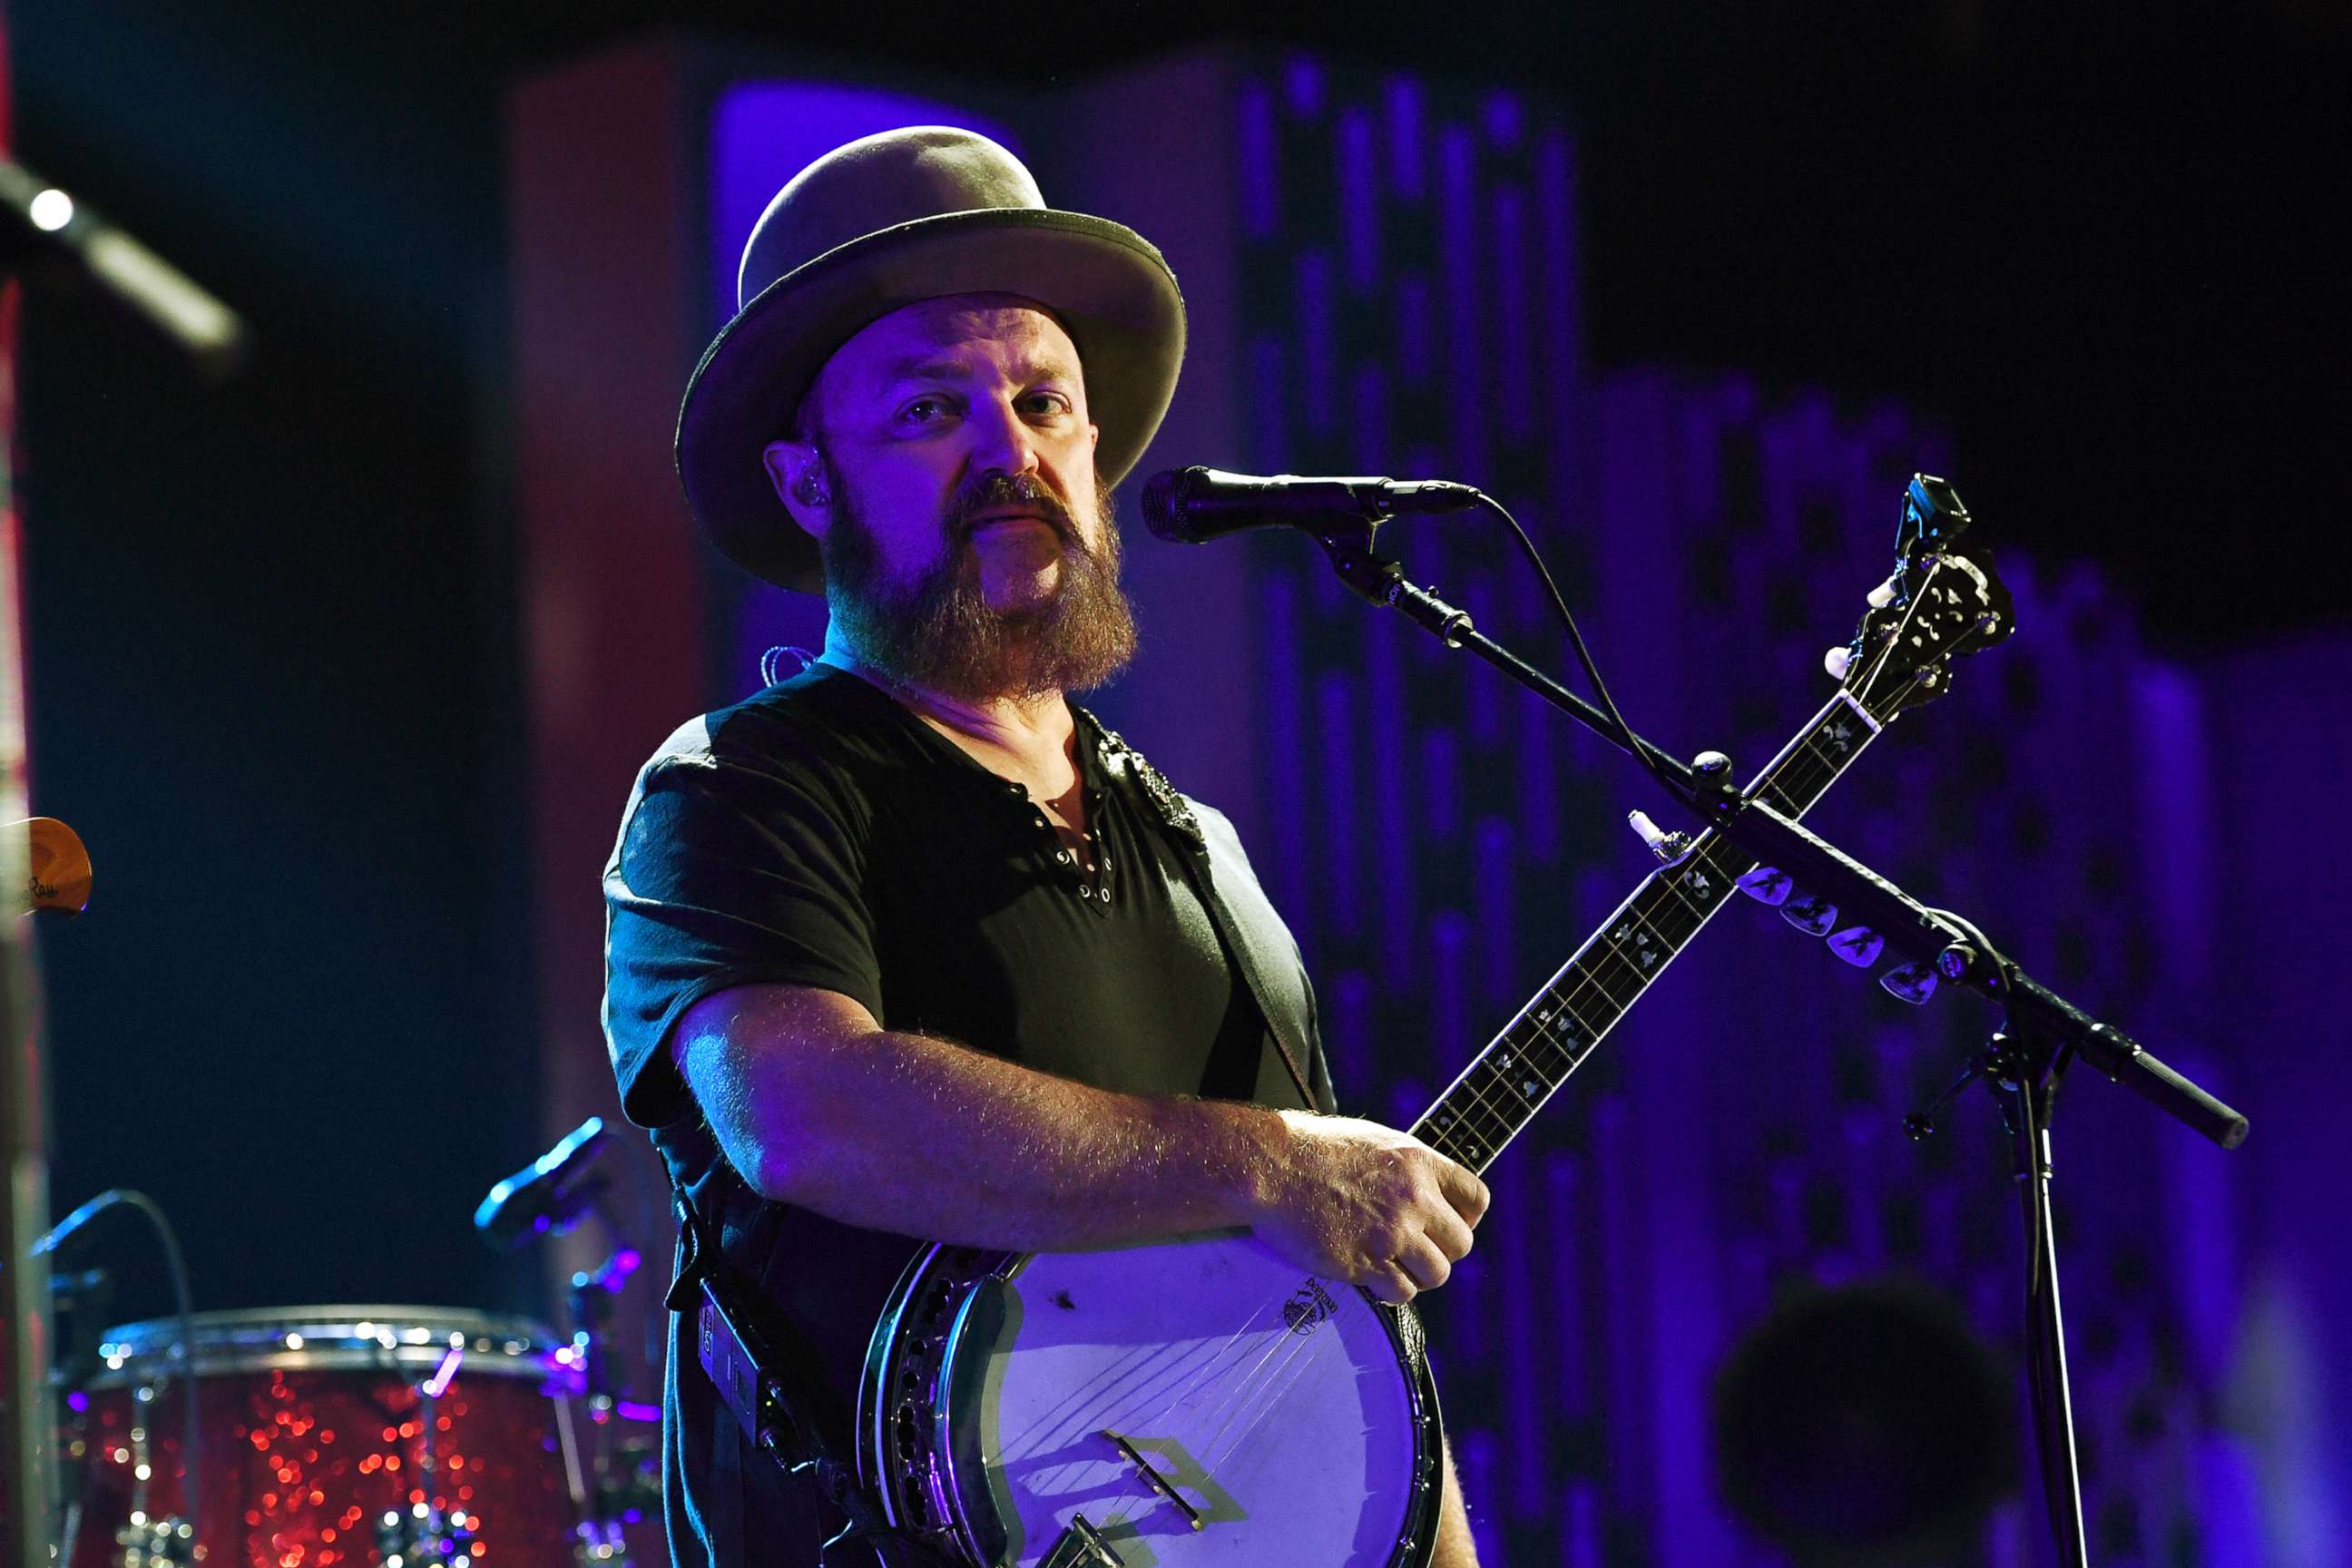 PHOTO: John Driskell Hopkins of Zac Brown Band performs onstage during the 2019 iHeartRadio Music Festival at T-Mobile Arena, Sept. 21, 2019, in Las Vegas.